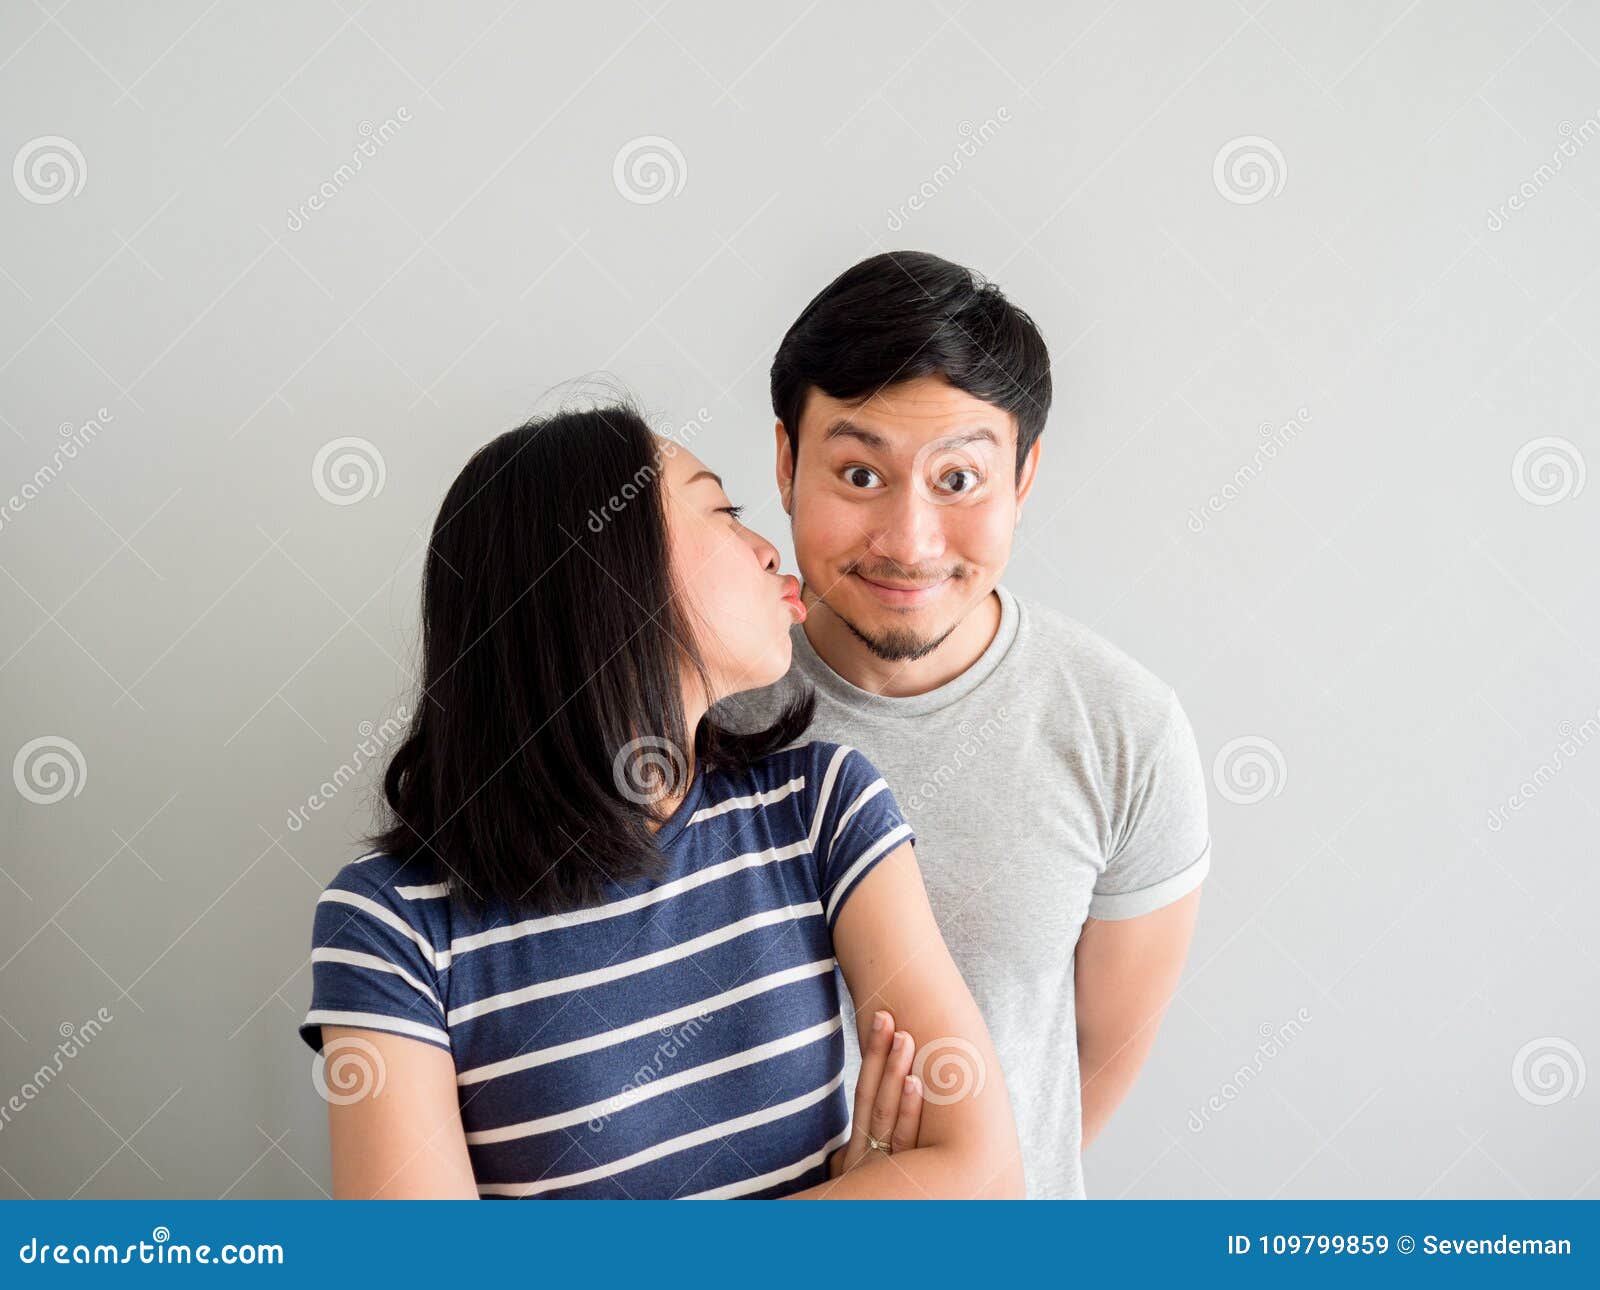 Funny Lovely Couple Trying To Kiss Each Other. Concept of Comedy Stock  Image - Image of cheerful, people: 109799859